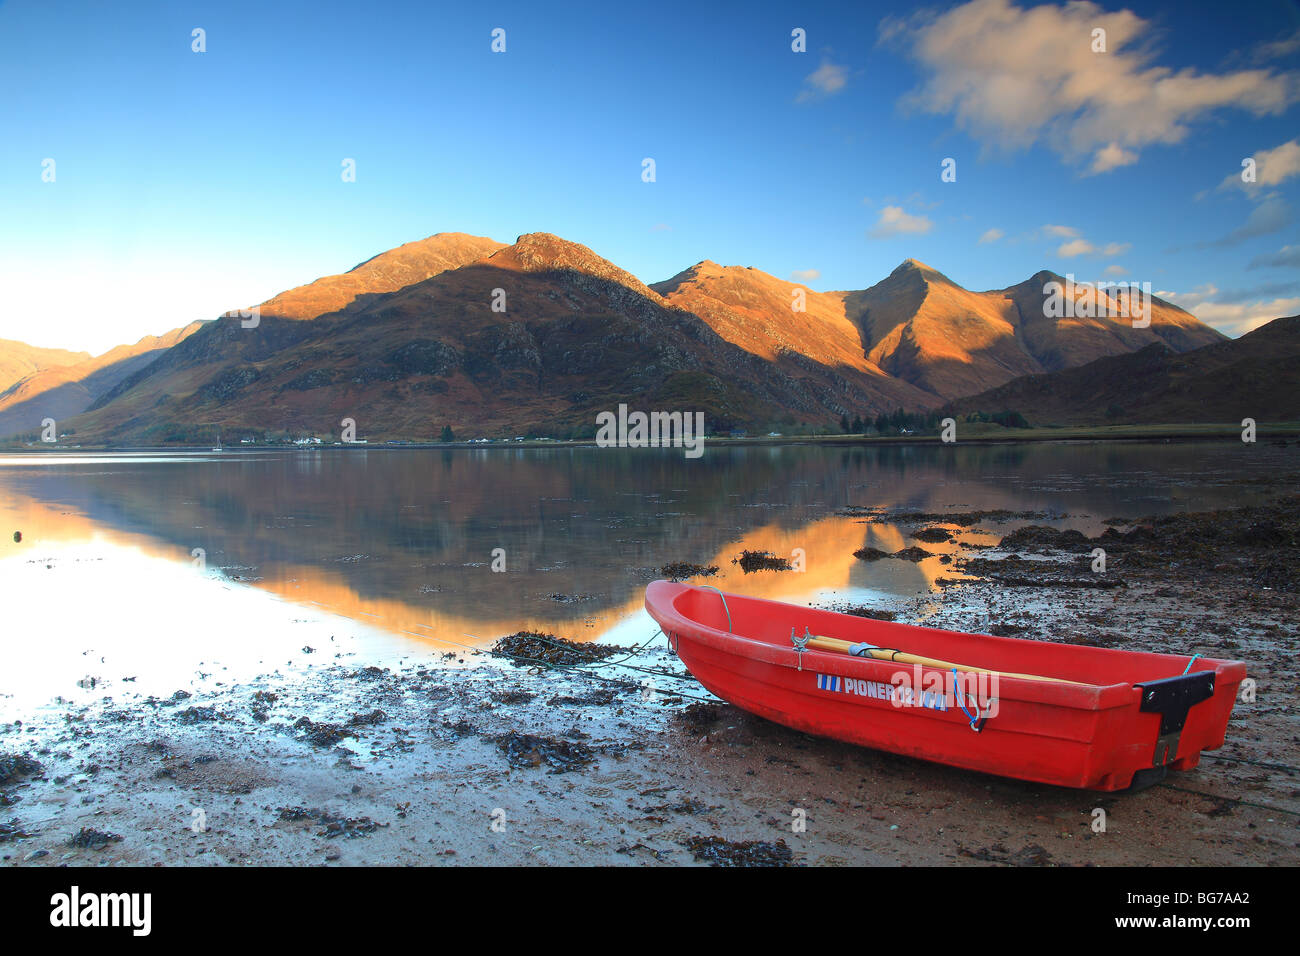 Landscape of a red rowing boat on the shoreline of Loch Duich, Scotland with the Five Sisters mountain range in the background. Stock Photo